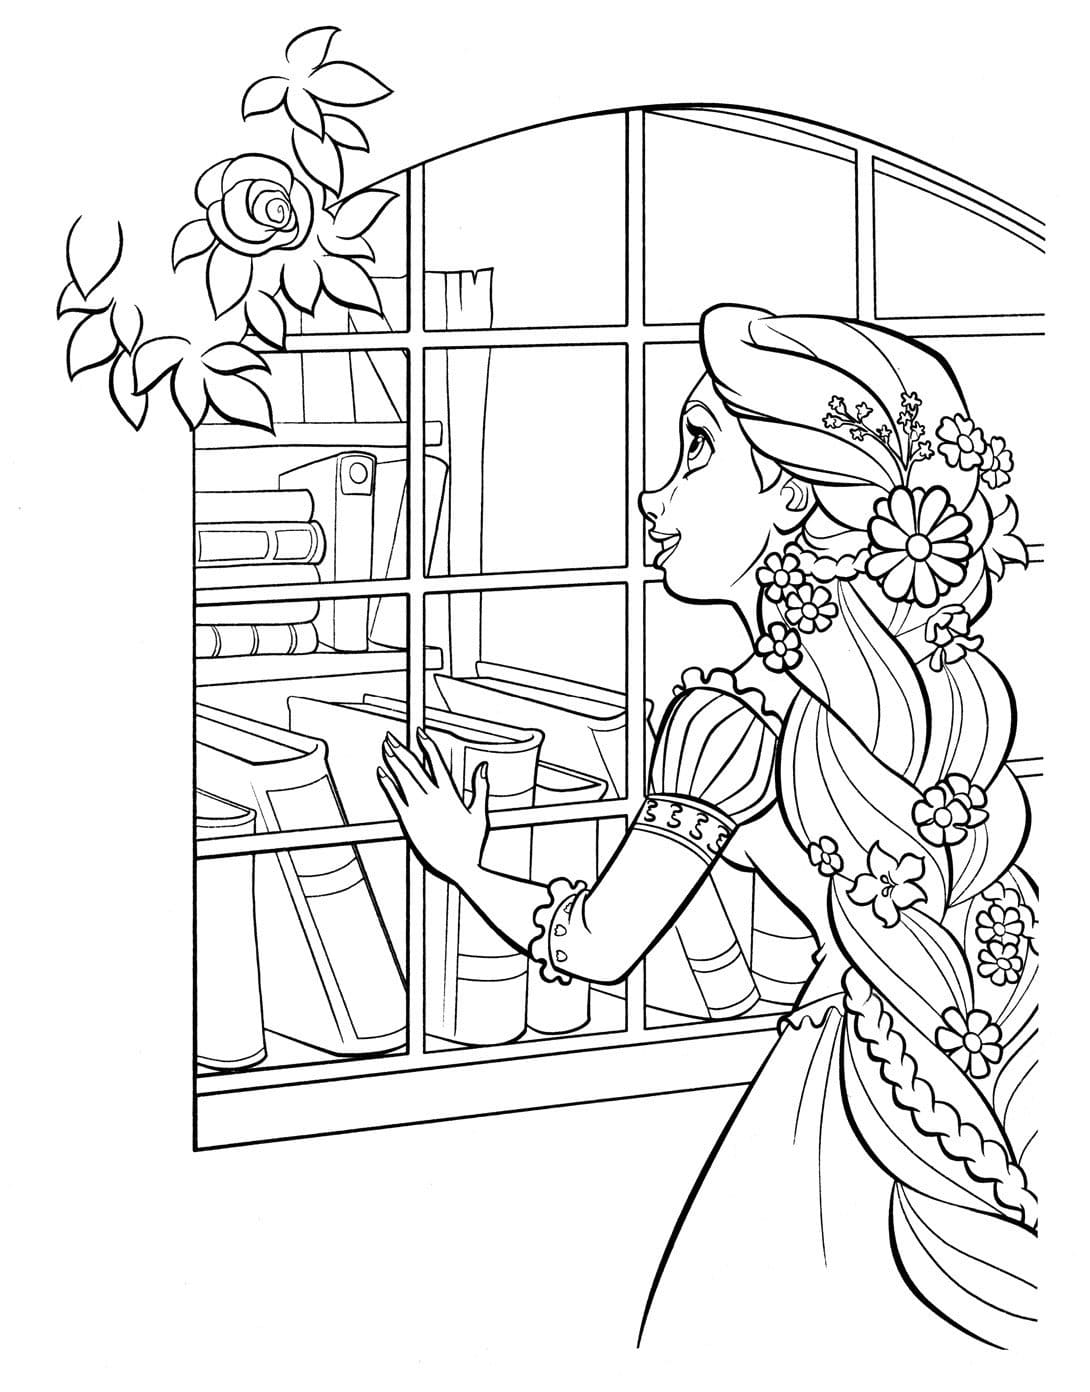 Tangled coloring pages by coloringpageswk on